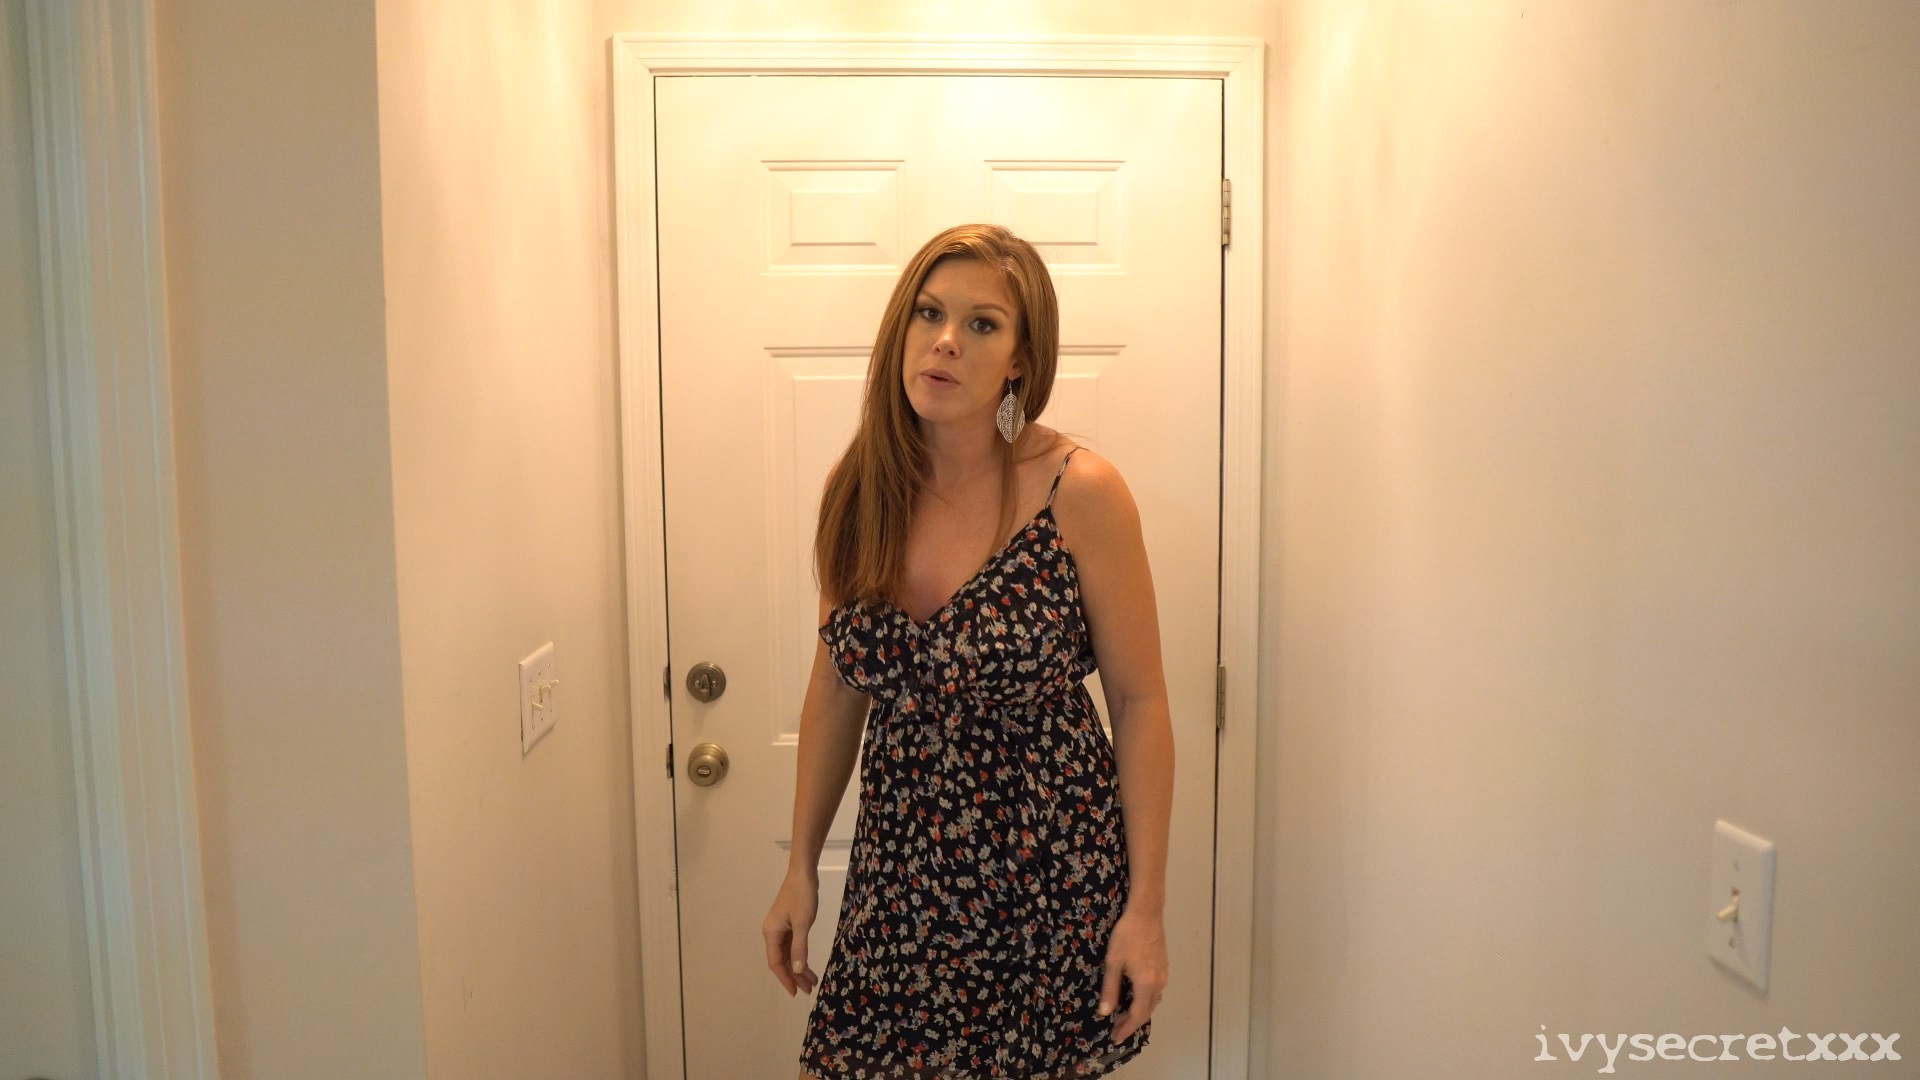 Ivy Secret - Mommy knows how to take care of you